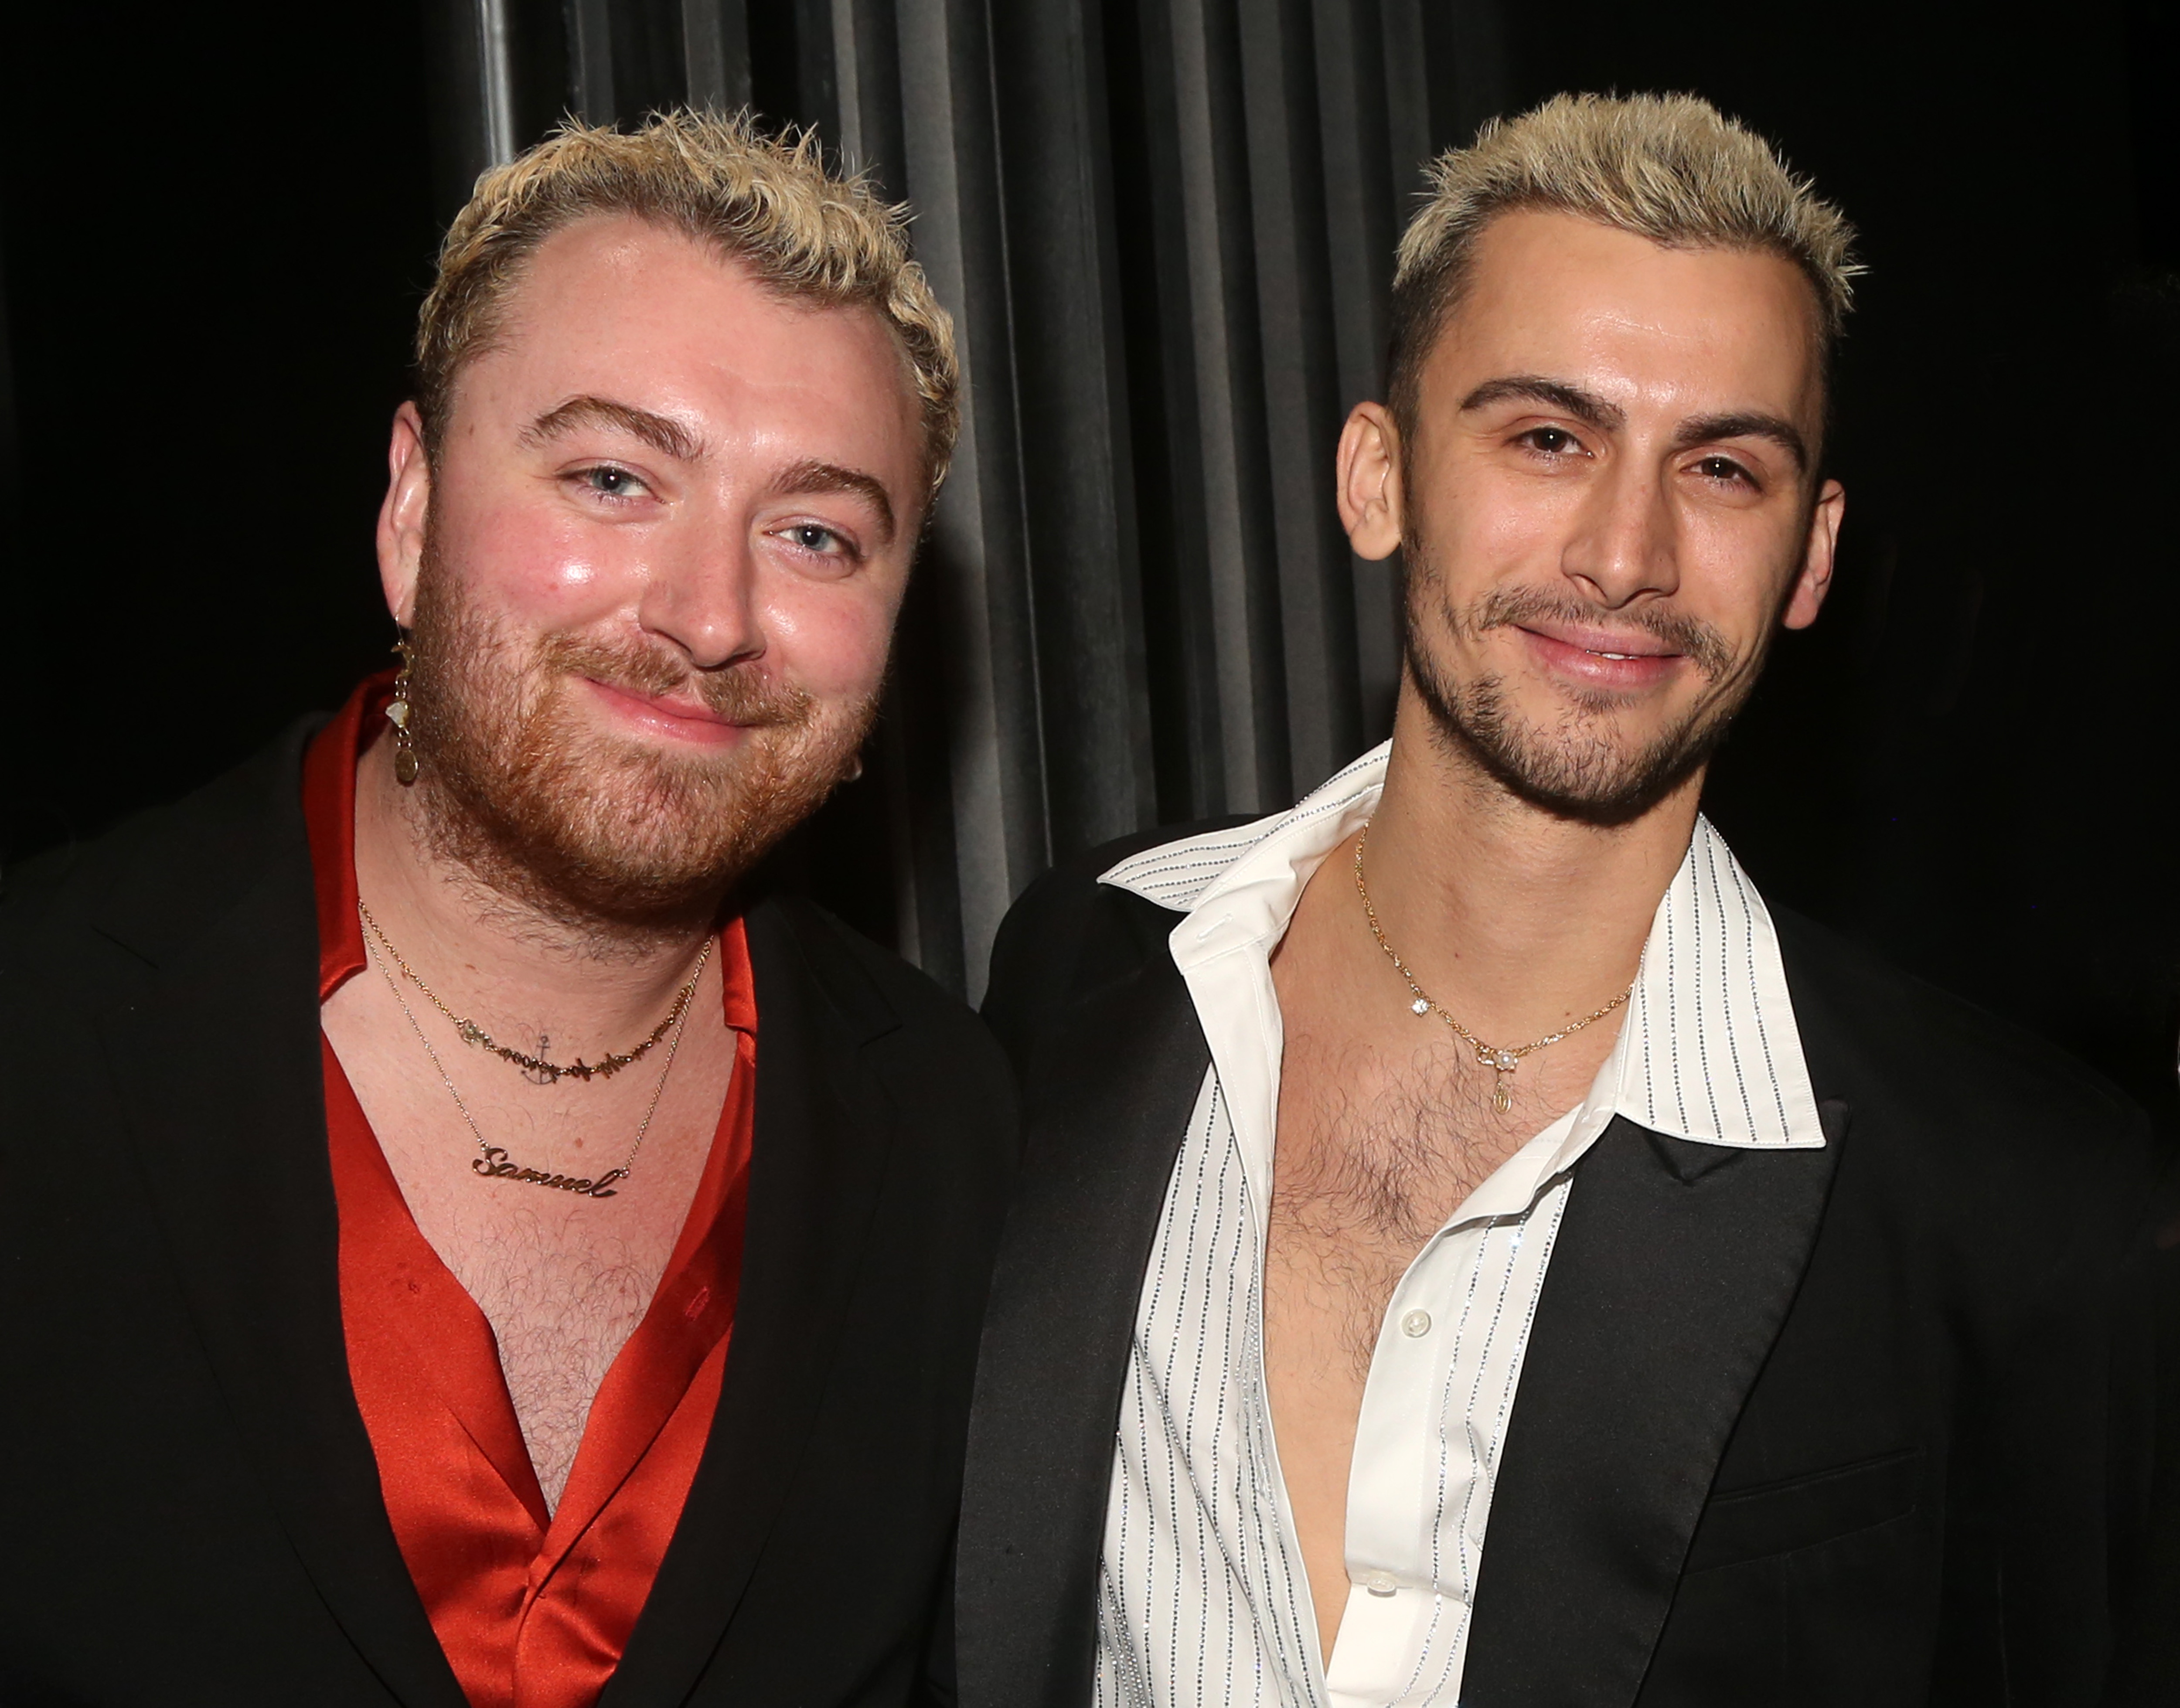 Sam Smith and partner Christian Cowan pose backstage at the musical "Some Like it Hot" on Broadway at The Shubert Theater on February 17, 2023 in New York City | Source: Getty Images